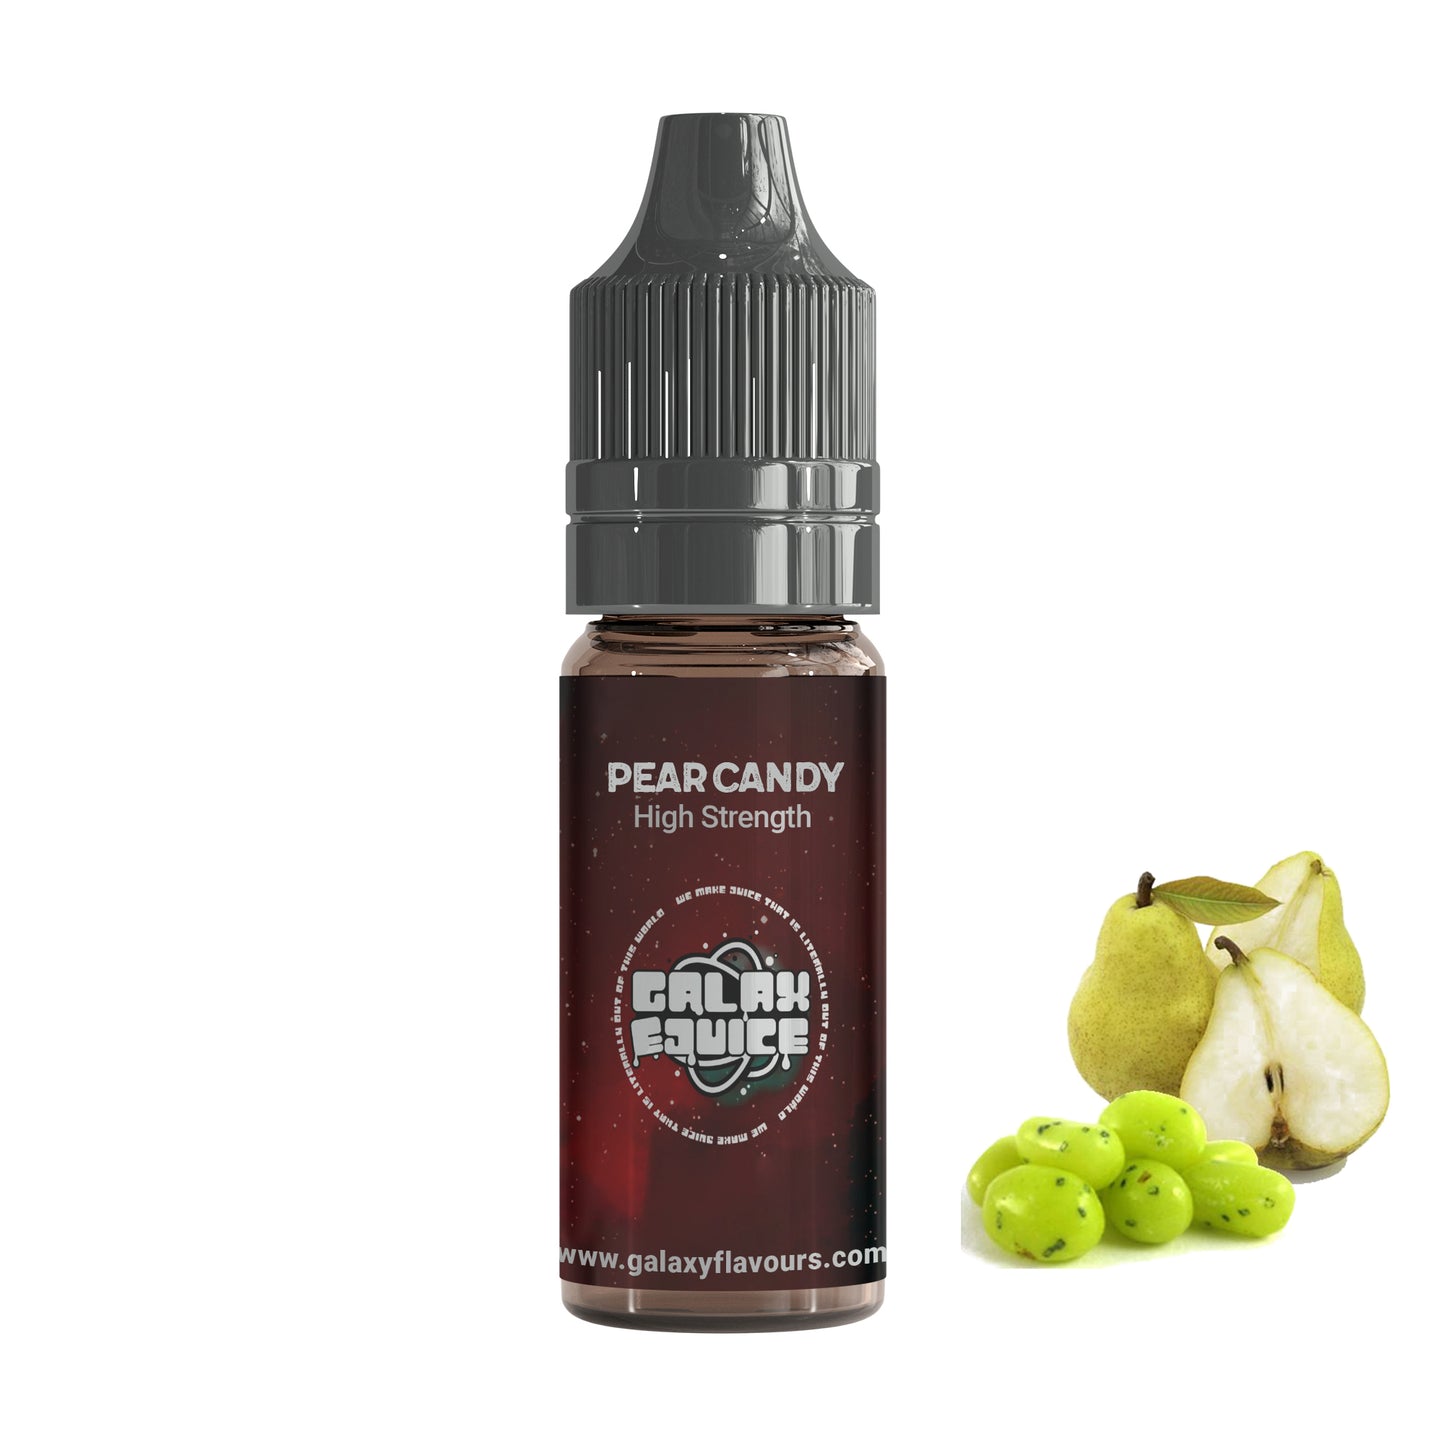 Pear Candy High Strength Professional Flavouring.